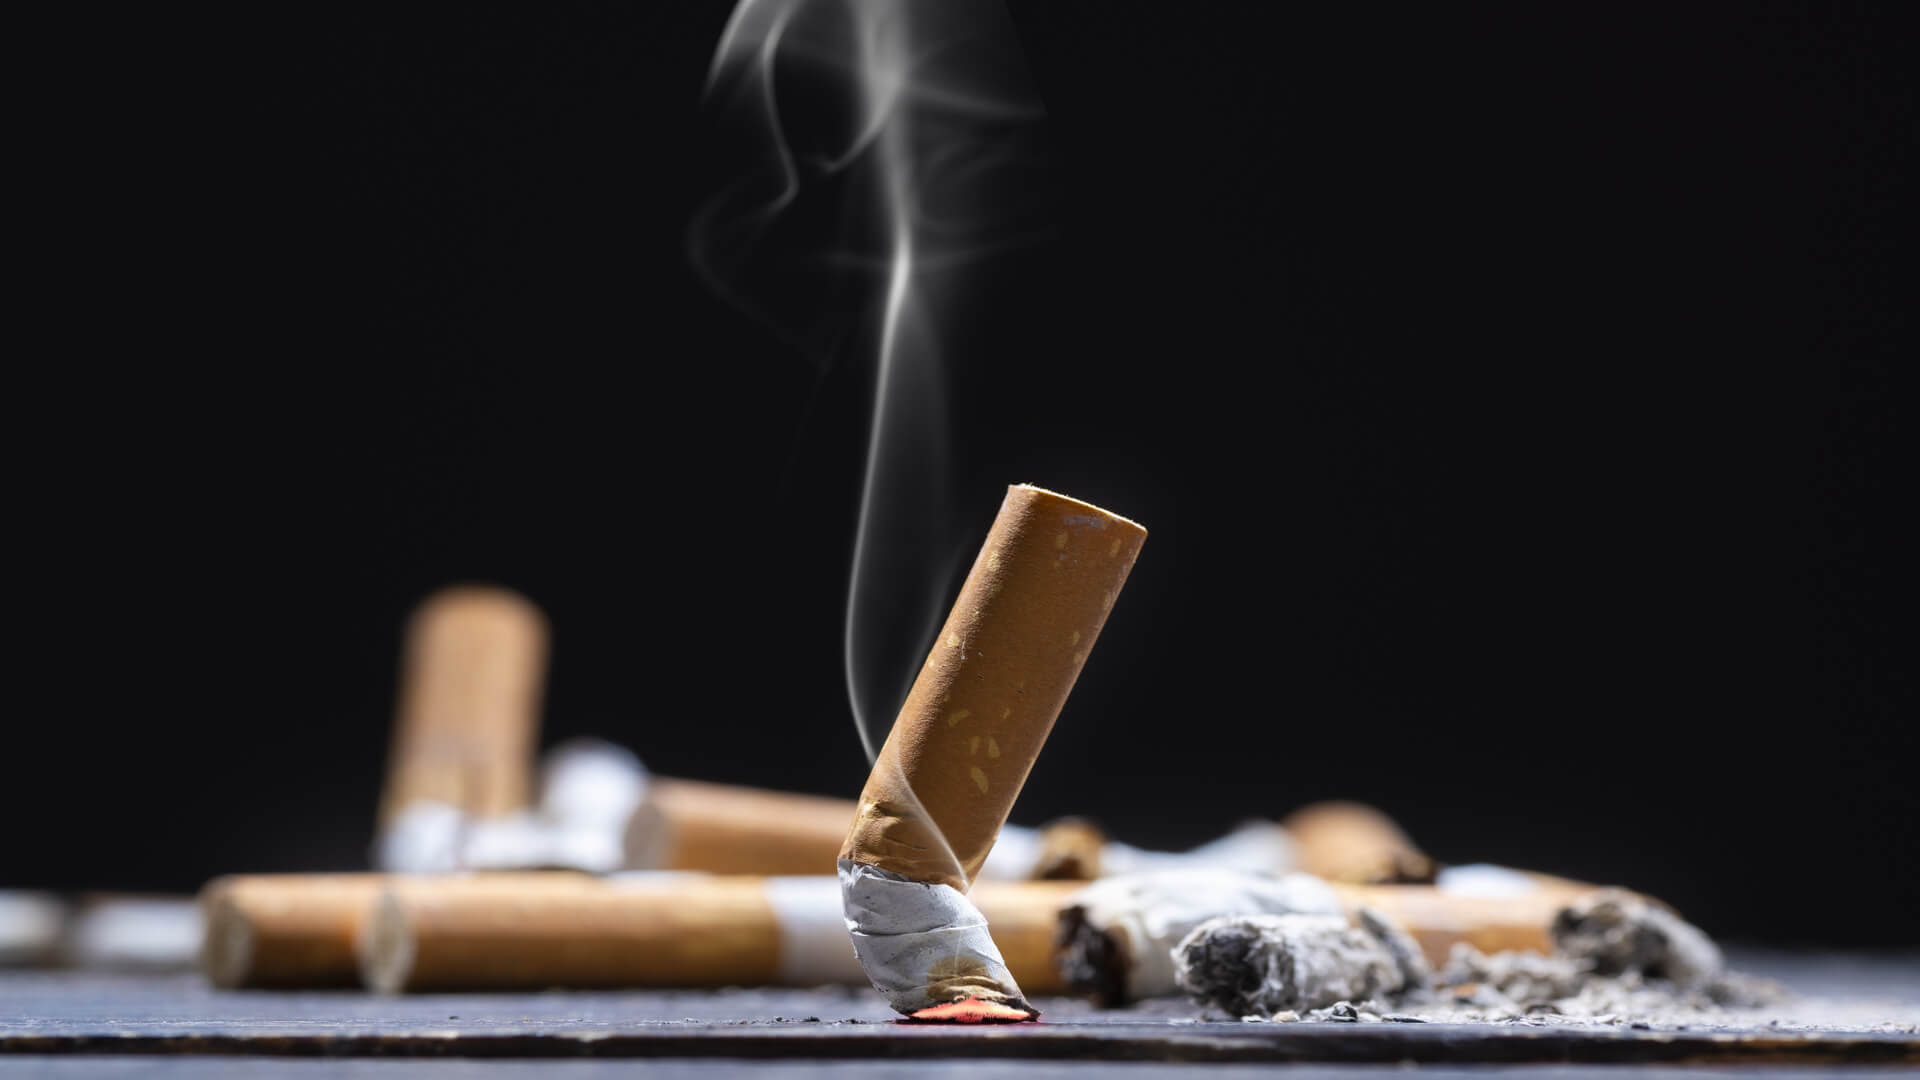 How Nicotine Consumption Can Cause Dental Issues